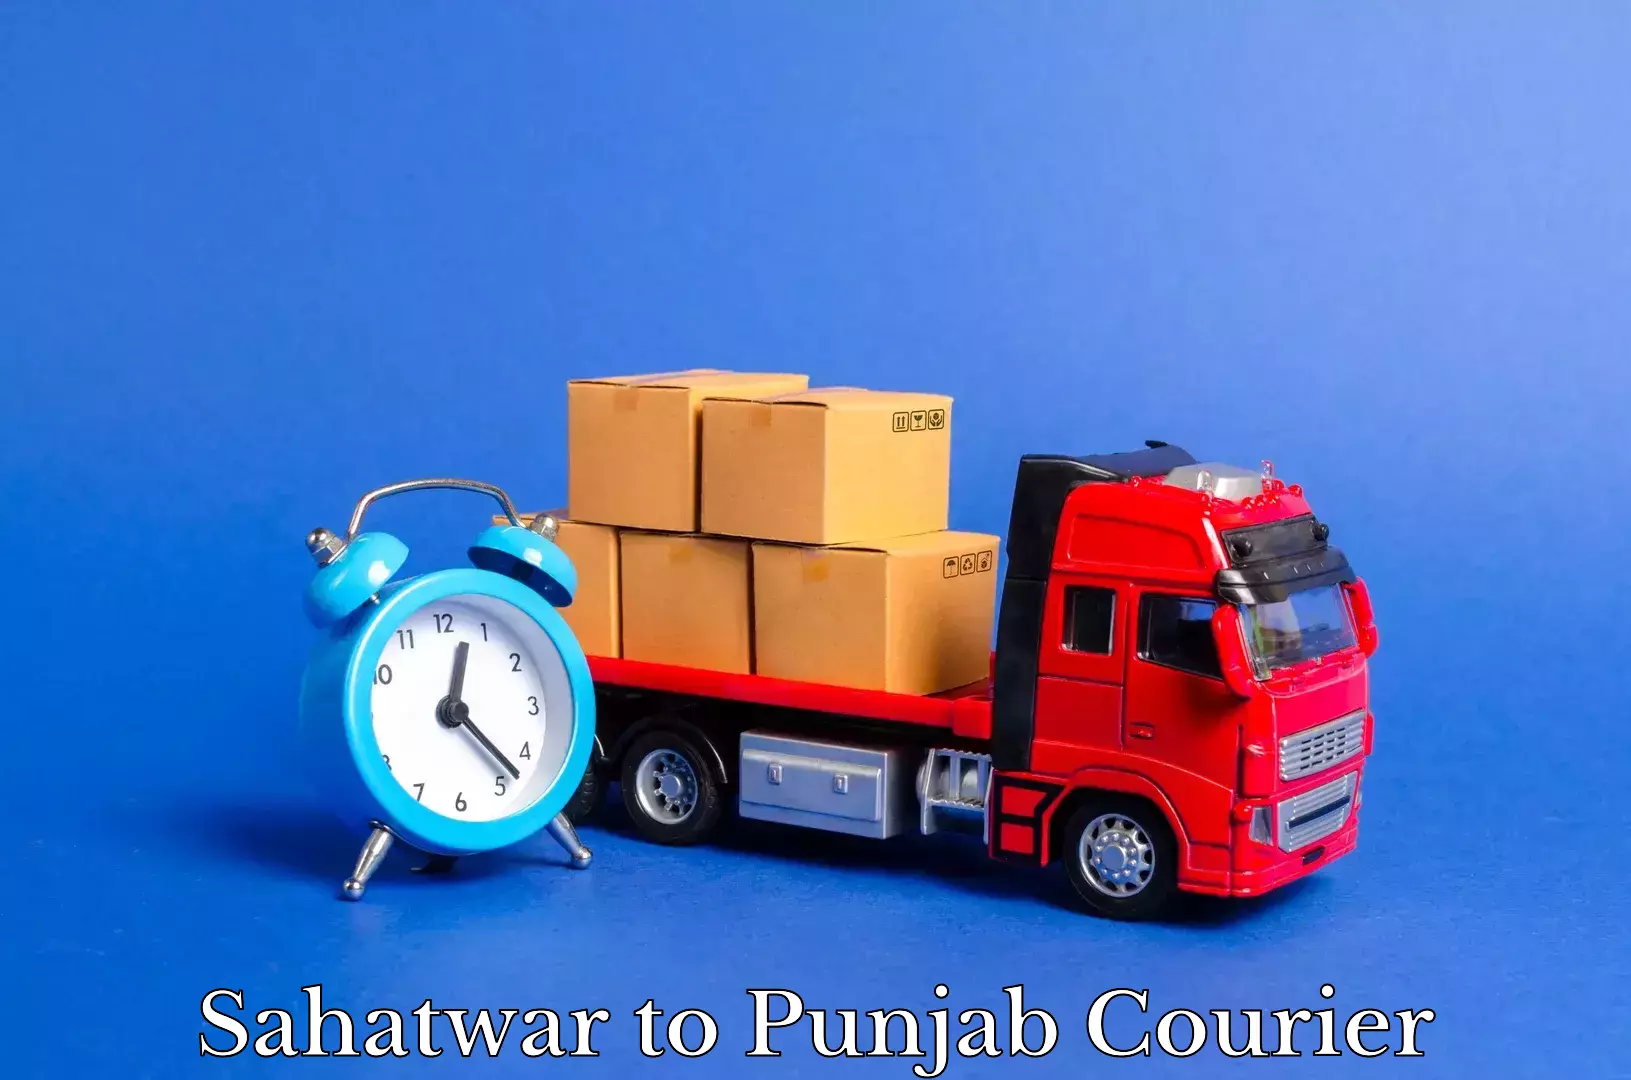 Trusted relocation services Sahatwar to Fatehgarh Sahib